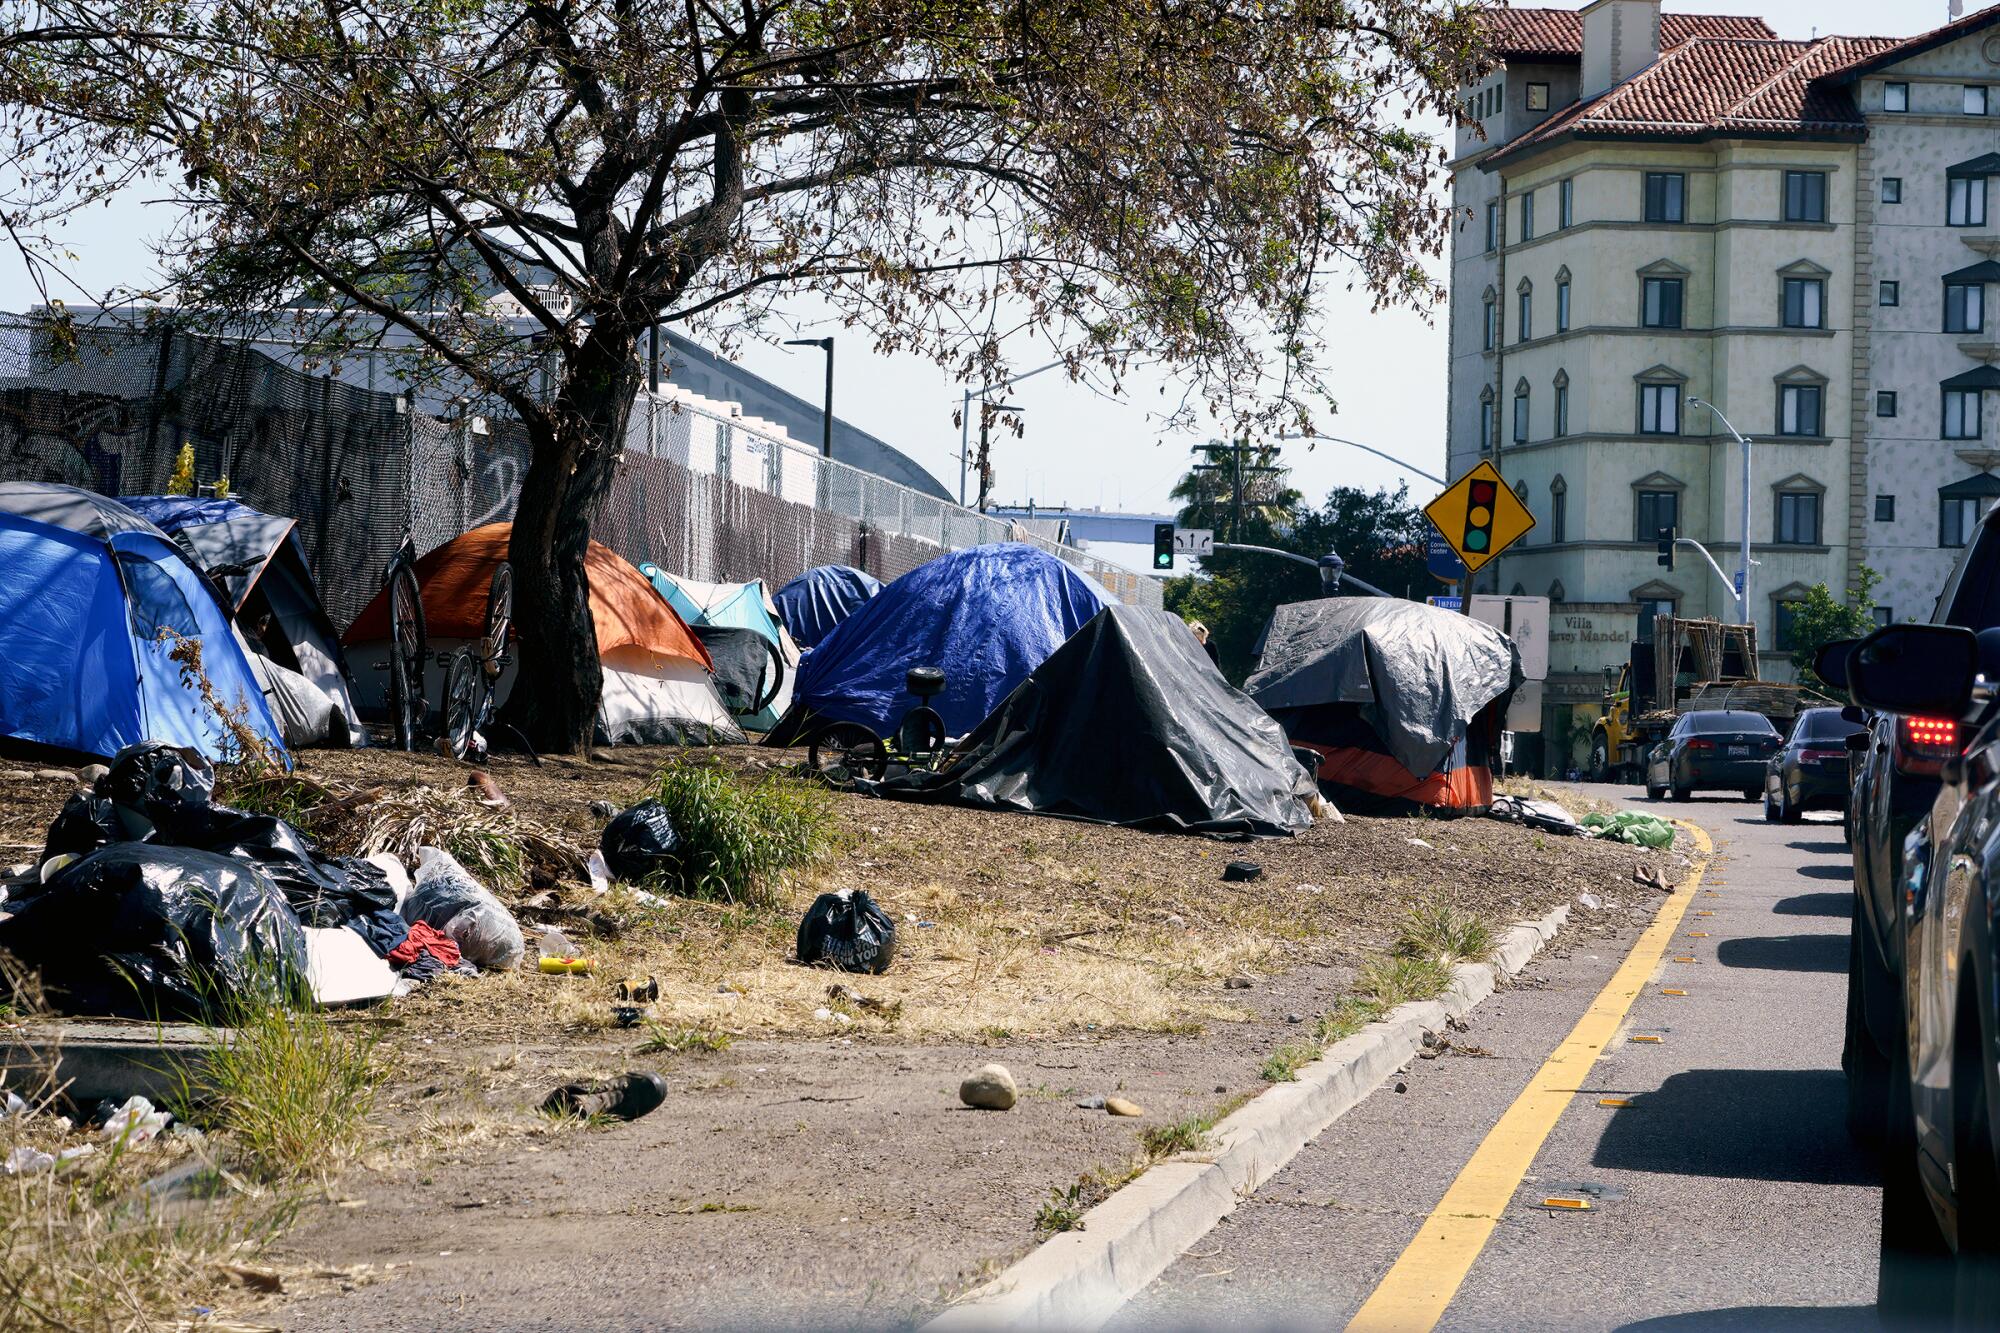 An encampment near the Imperial Avenue offramp on southbound Inxterstate 5 in San Diego.